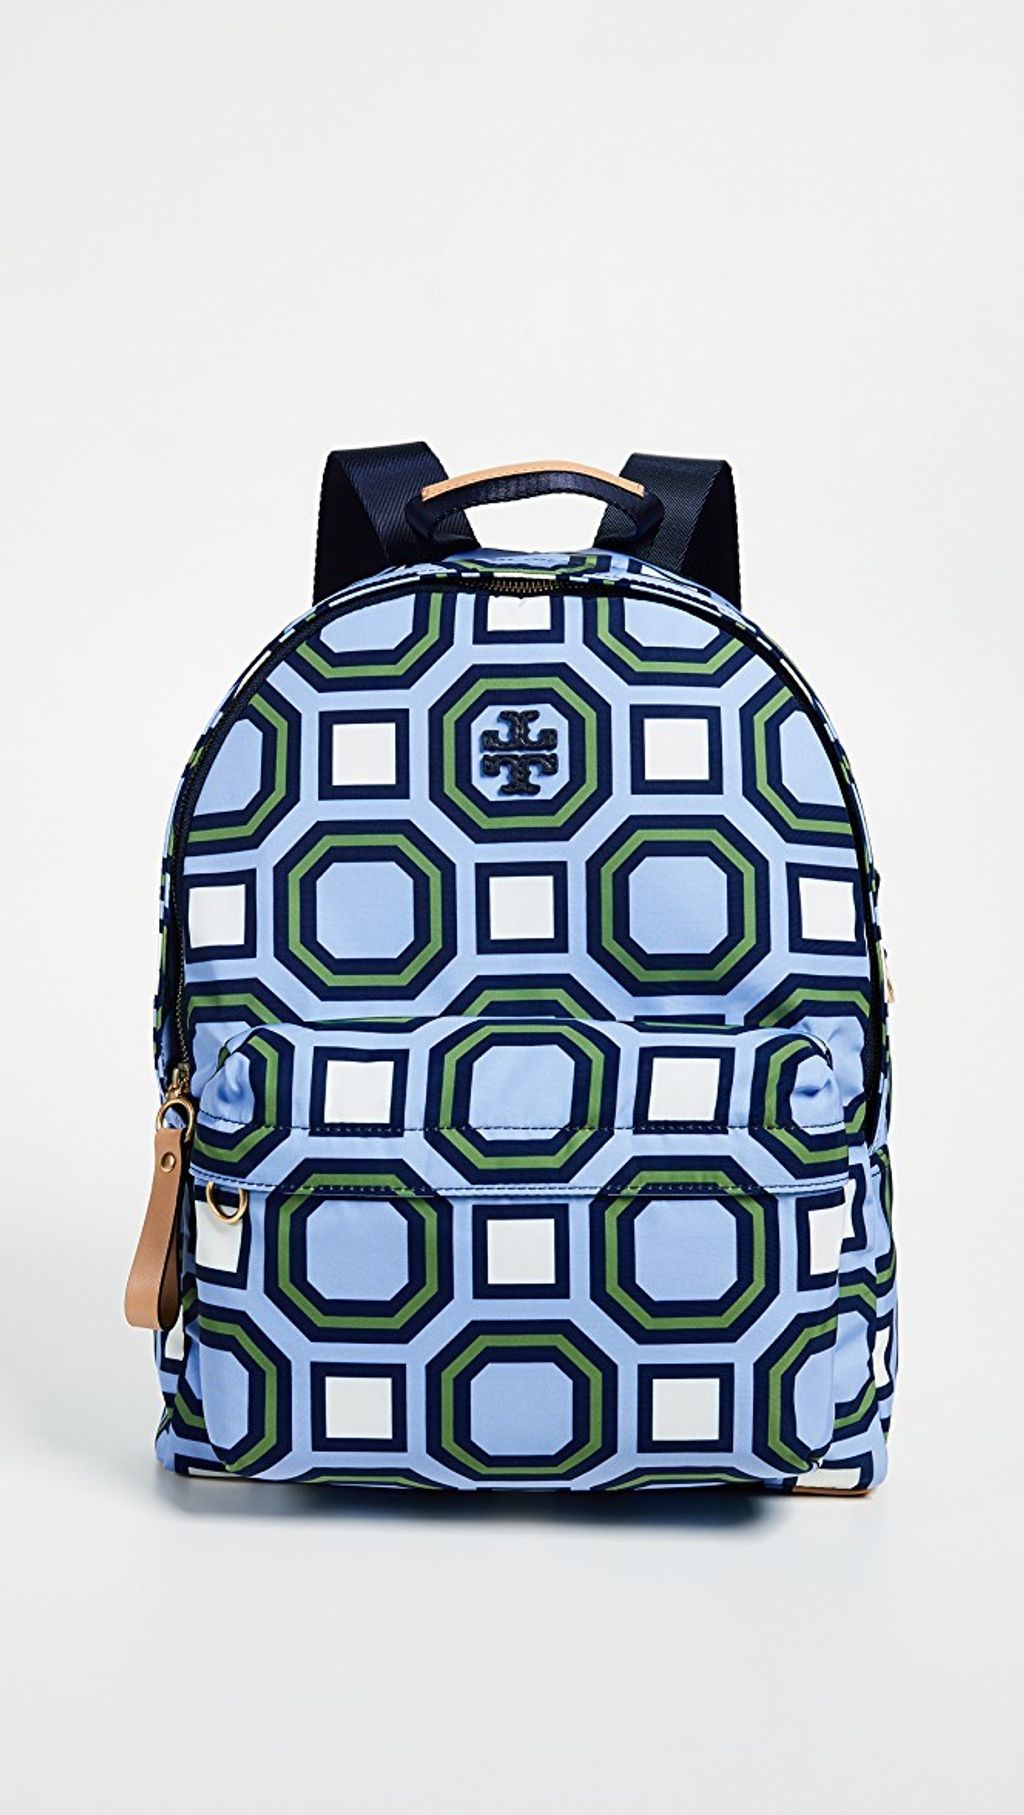 Tory Burch Printed Nylon Backpack – Luxe Paradise